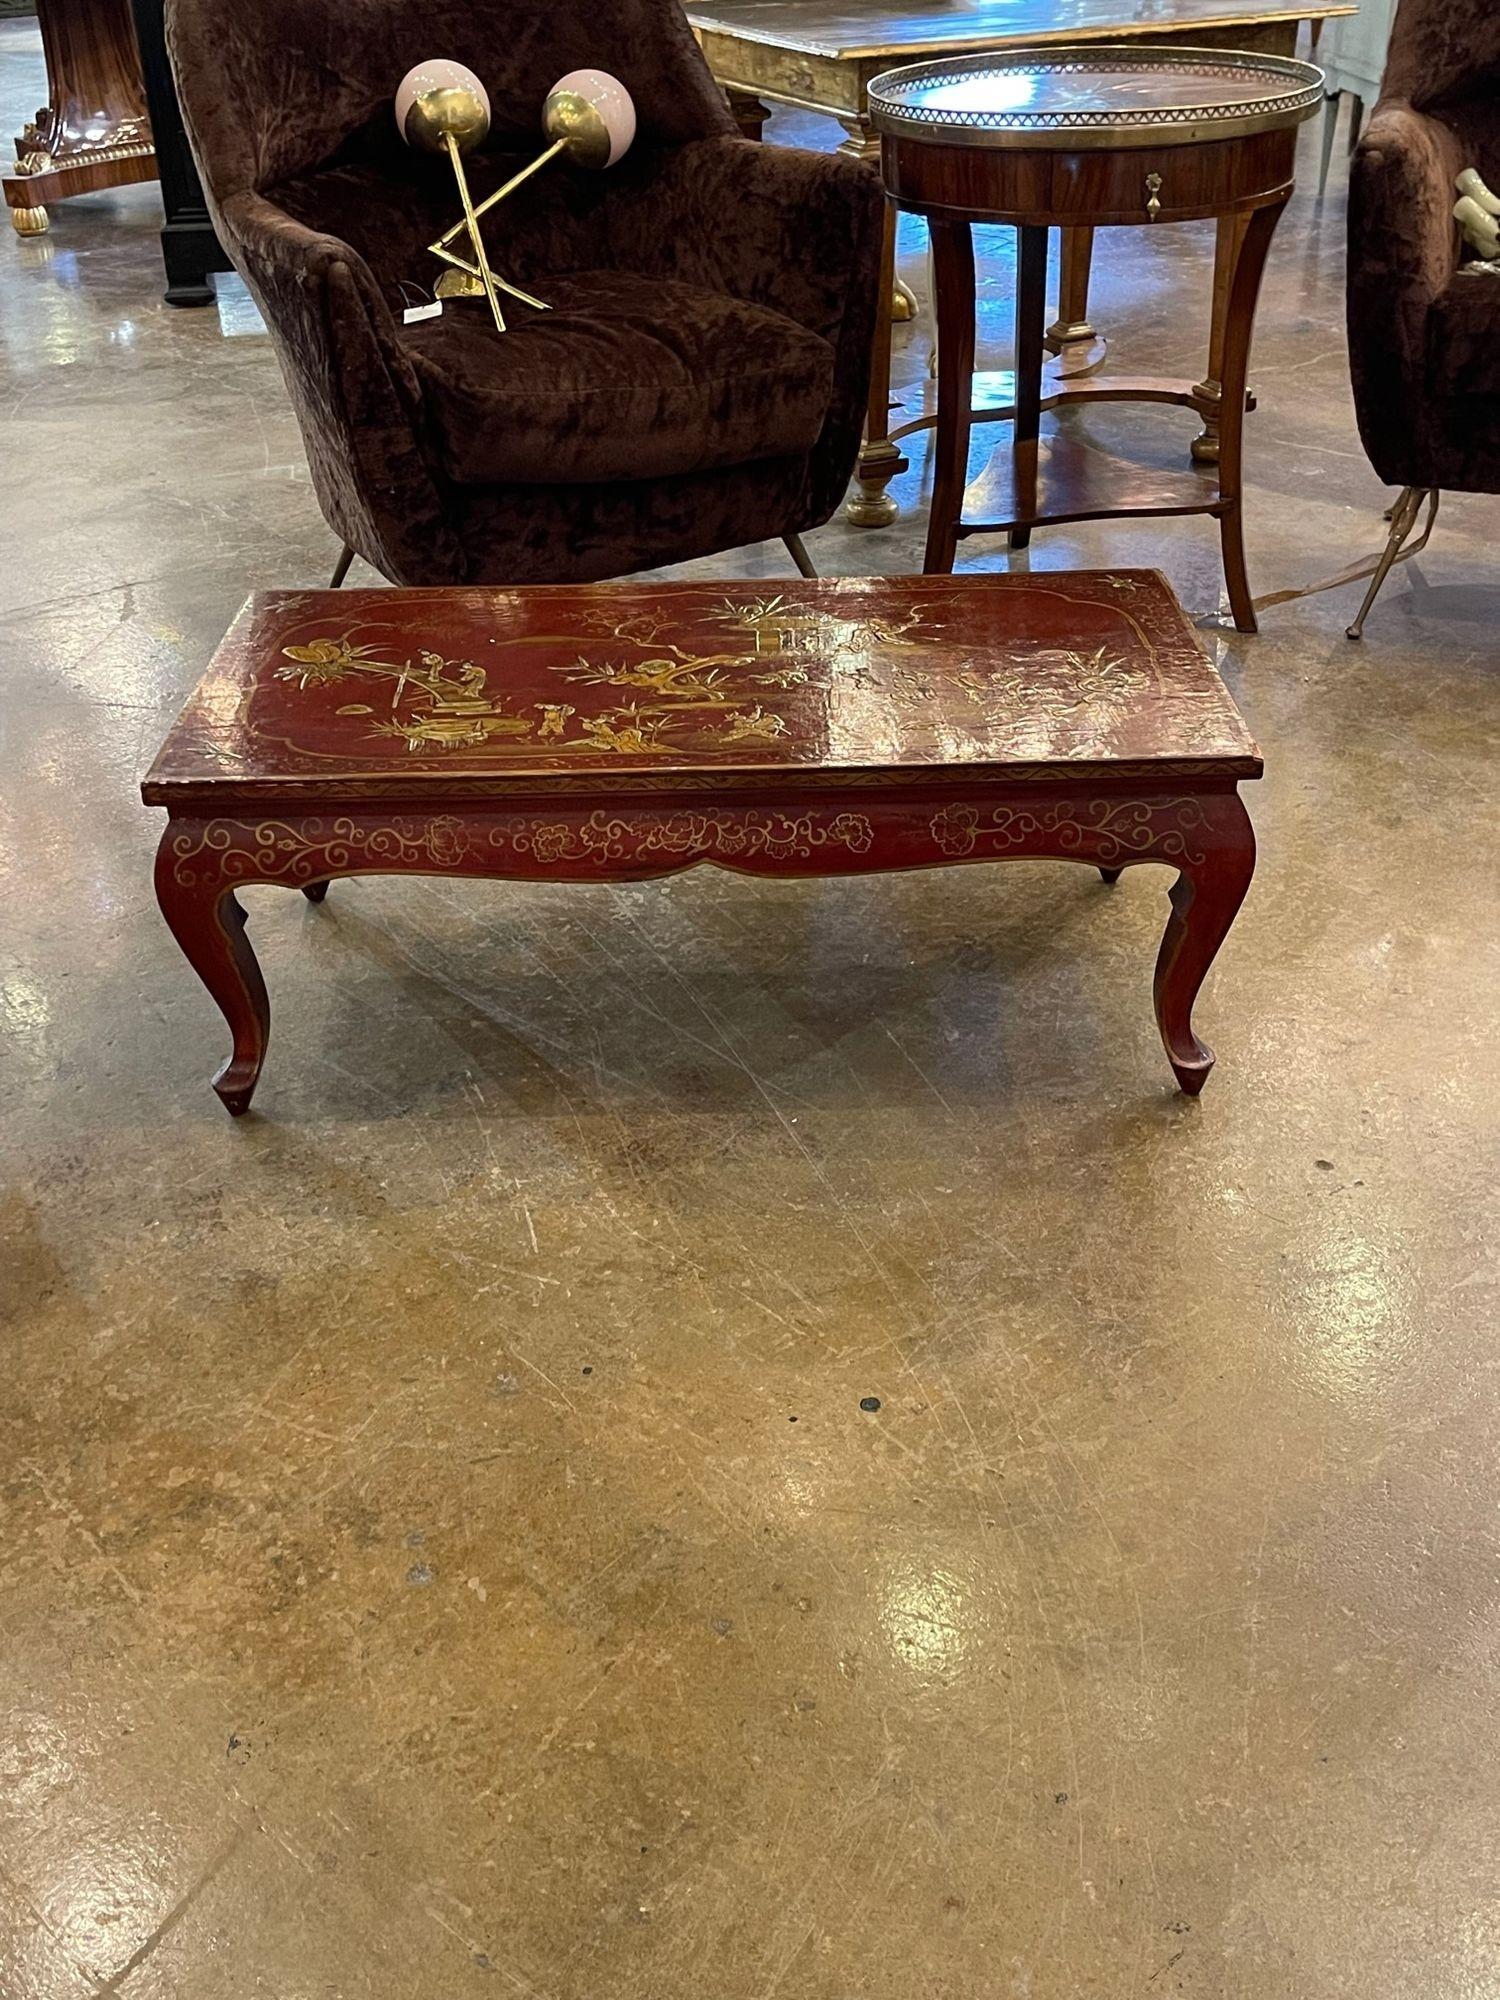 Beautiful antique Italian red Chinoiserie decorated coffee table. Very fine hand painted Asian designs on a red lacquered base. A true work of art!